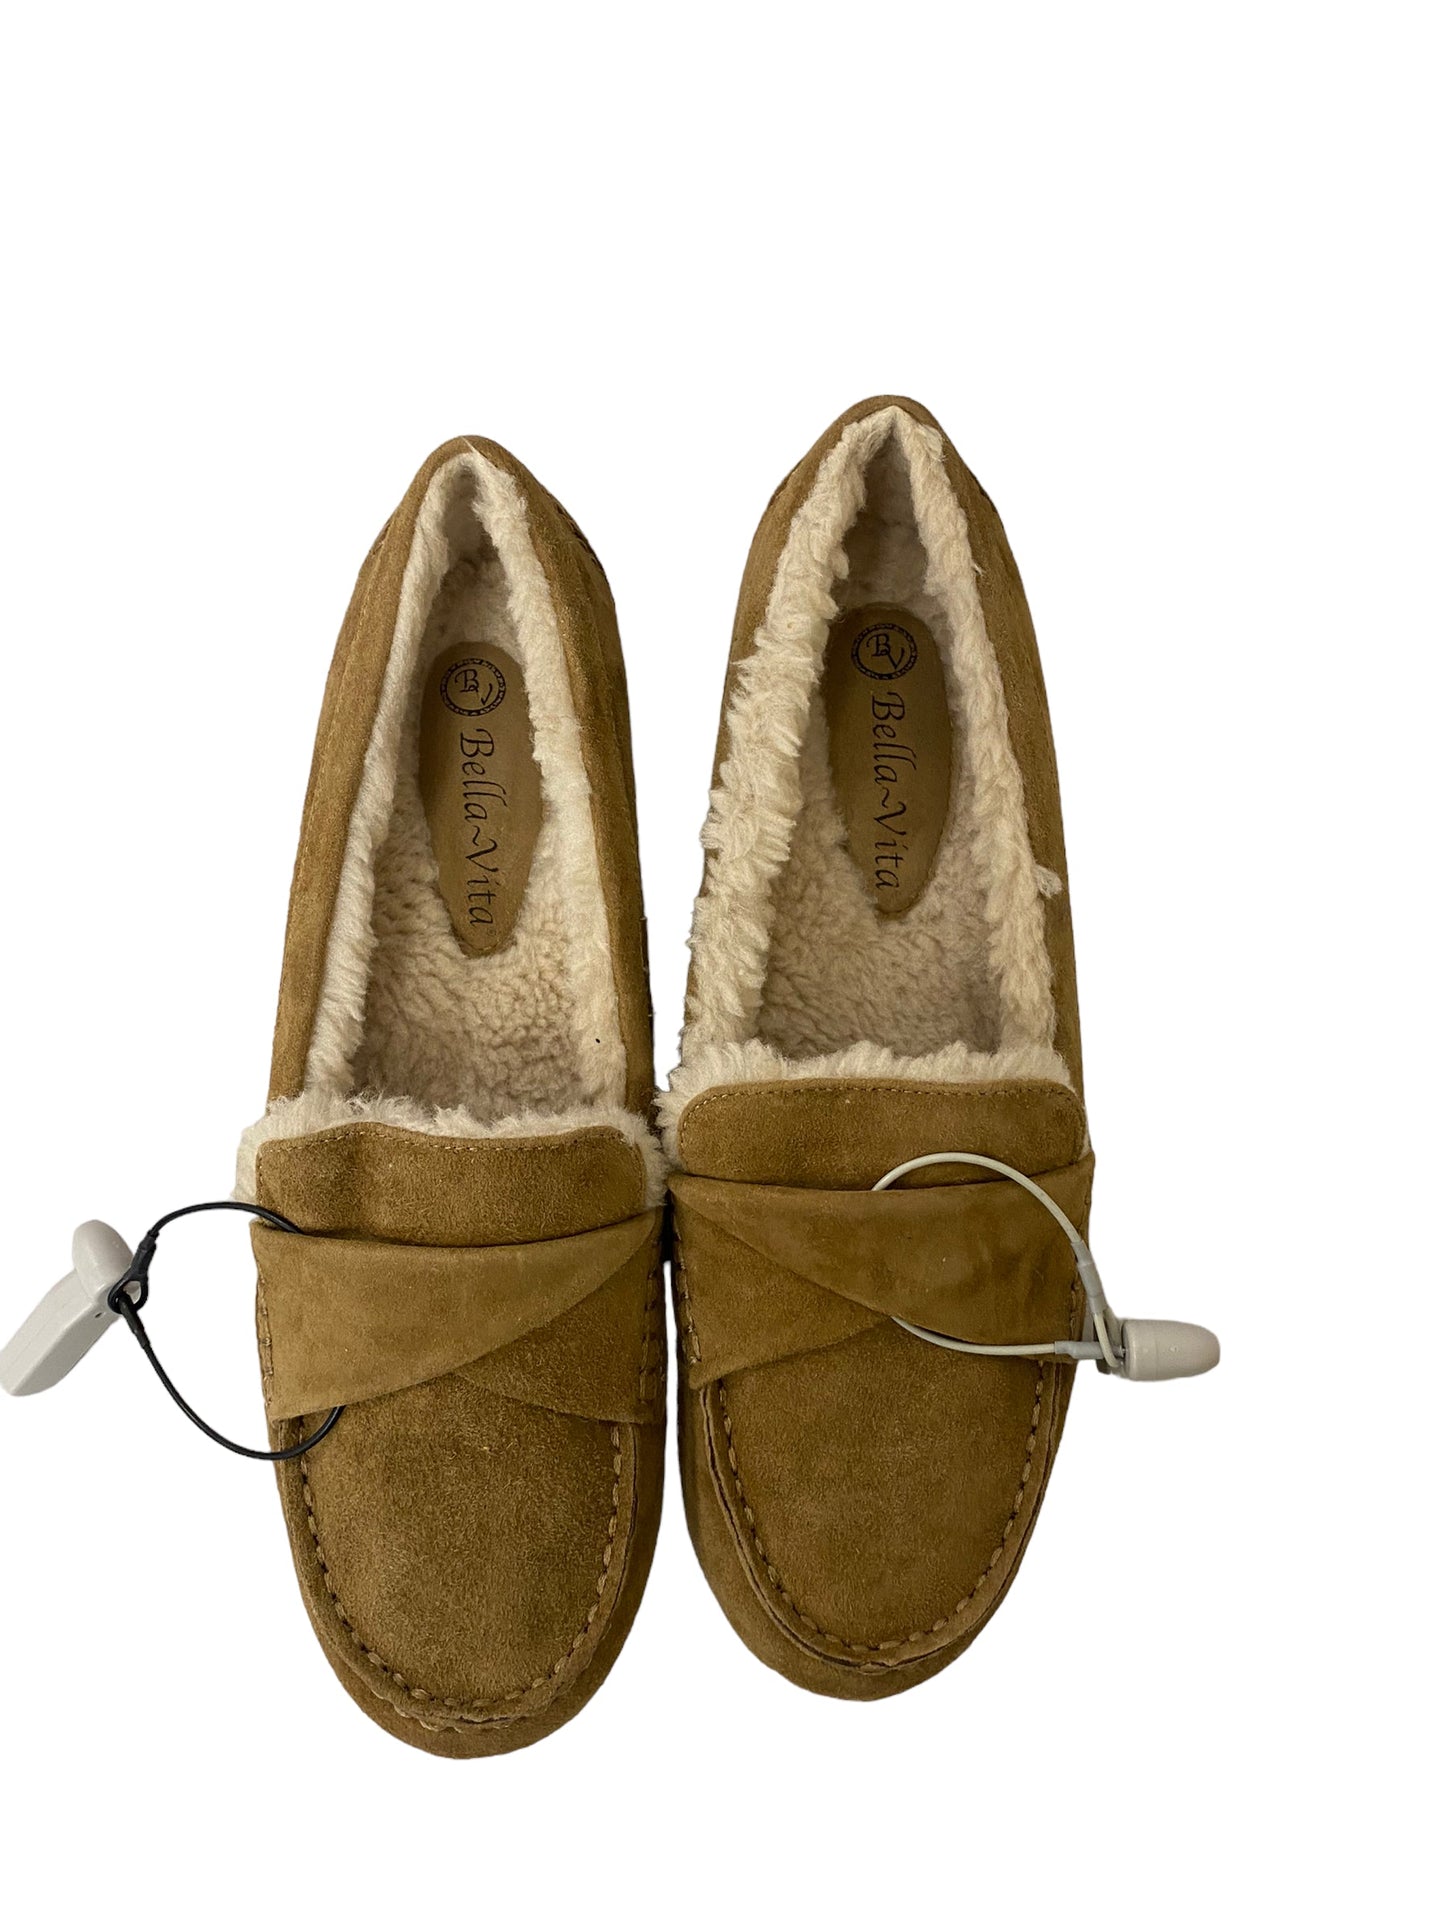 Shoes Flats Moccasin By Clothes Mentor  Size: 8.5